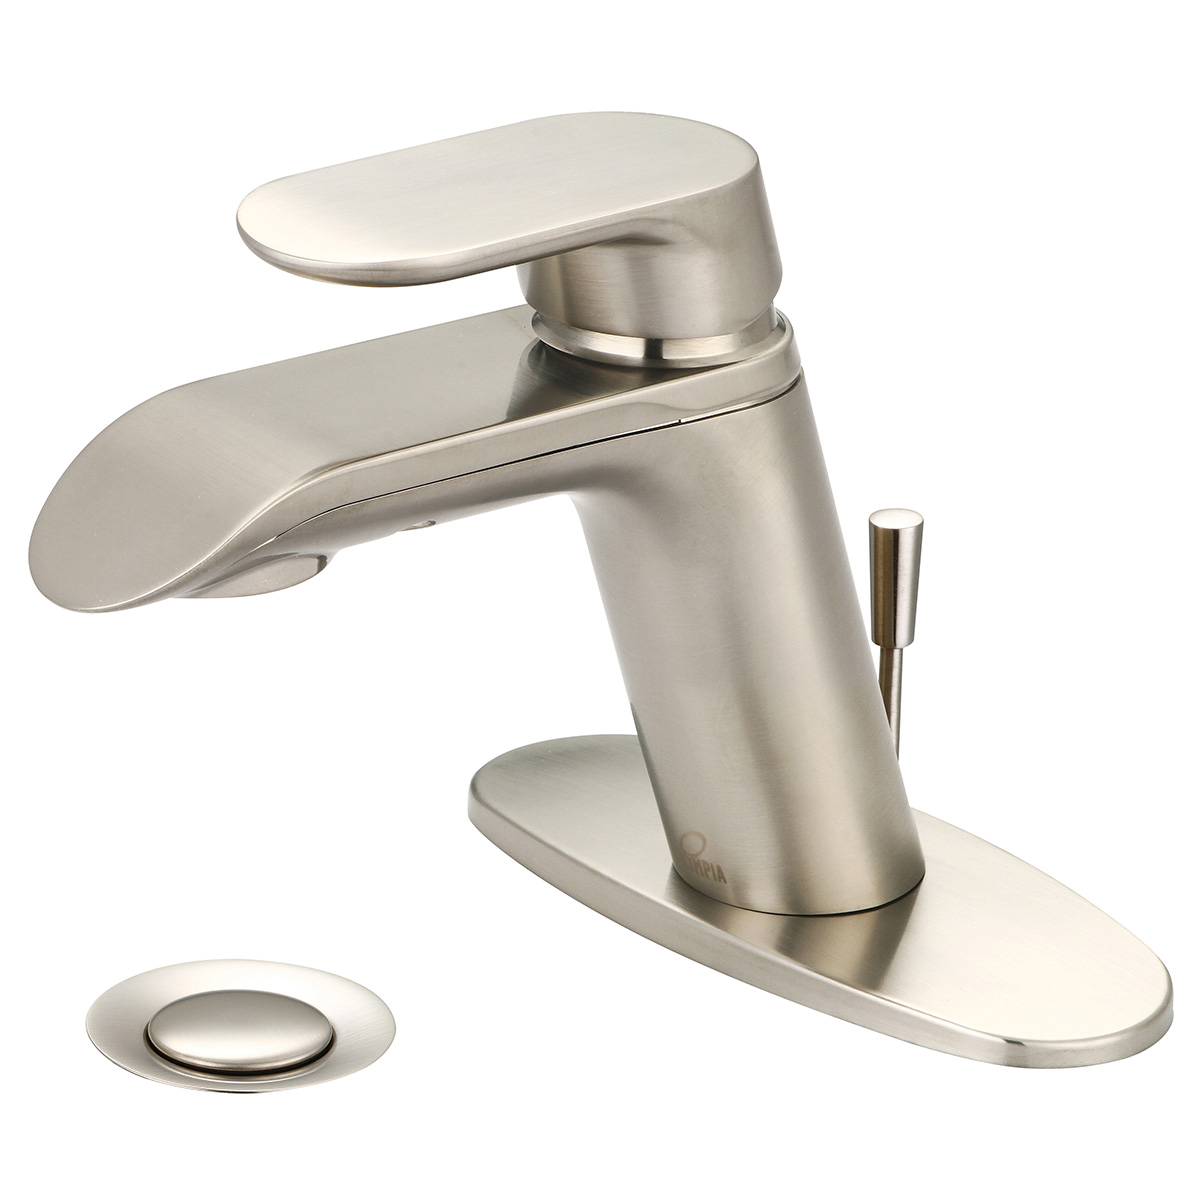 I1 L-6032-wd-bn 4.62 In. Single Handle Lavatory Faucet - Brushed Nickel